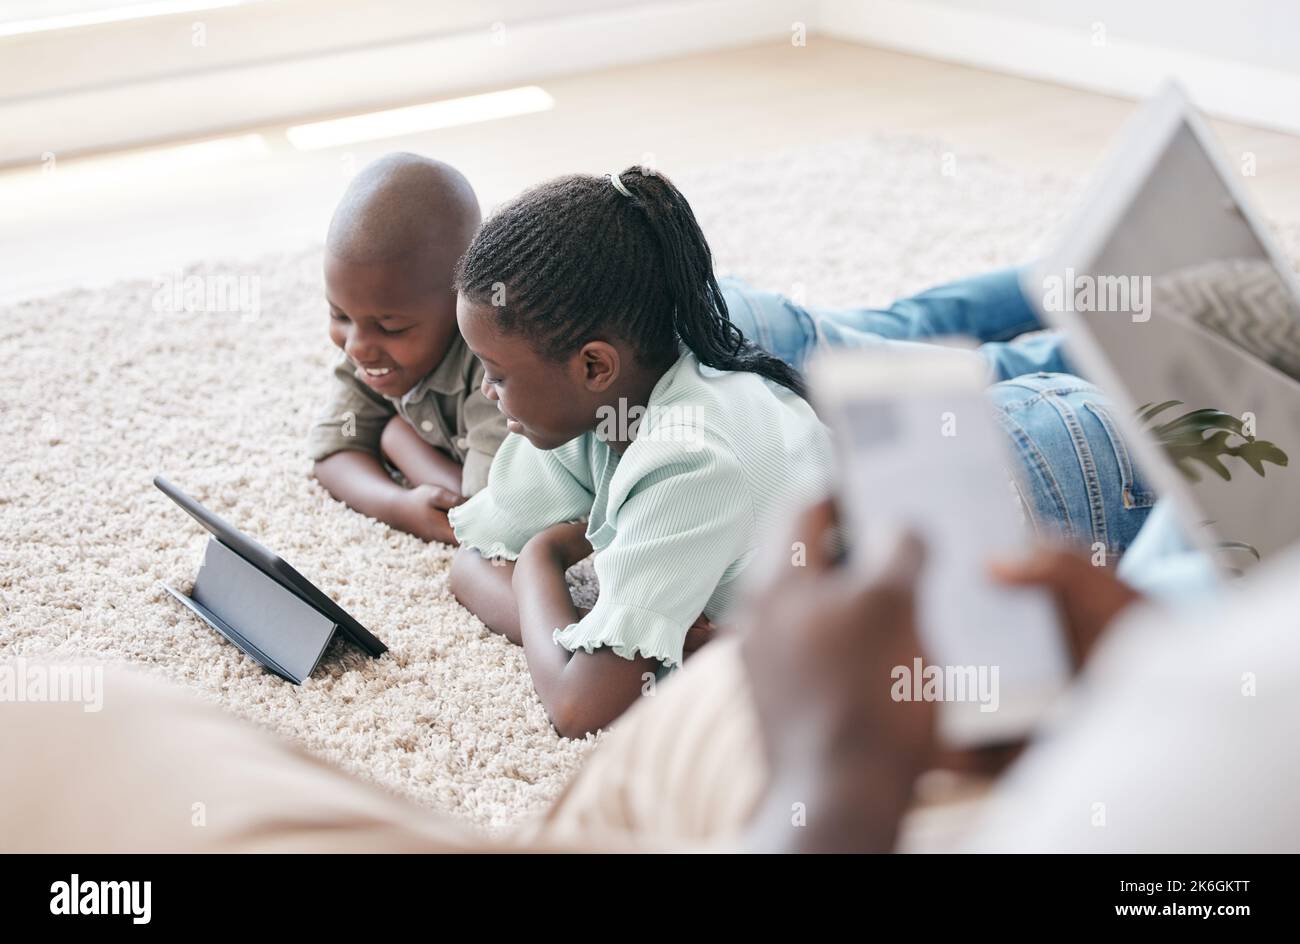 The memories we make with our family is everything. a brother and sister using a tablet at home. Stock Photo